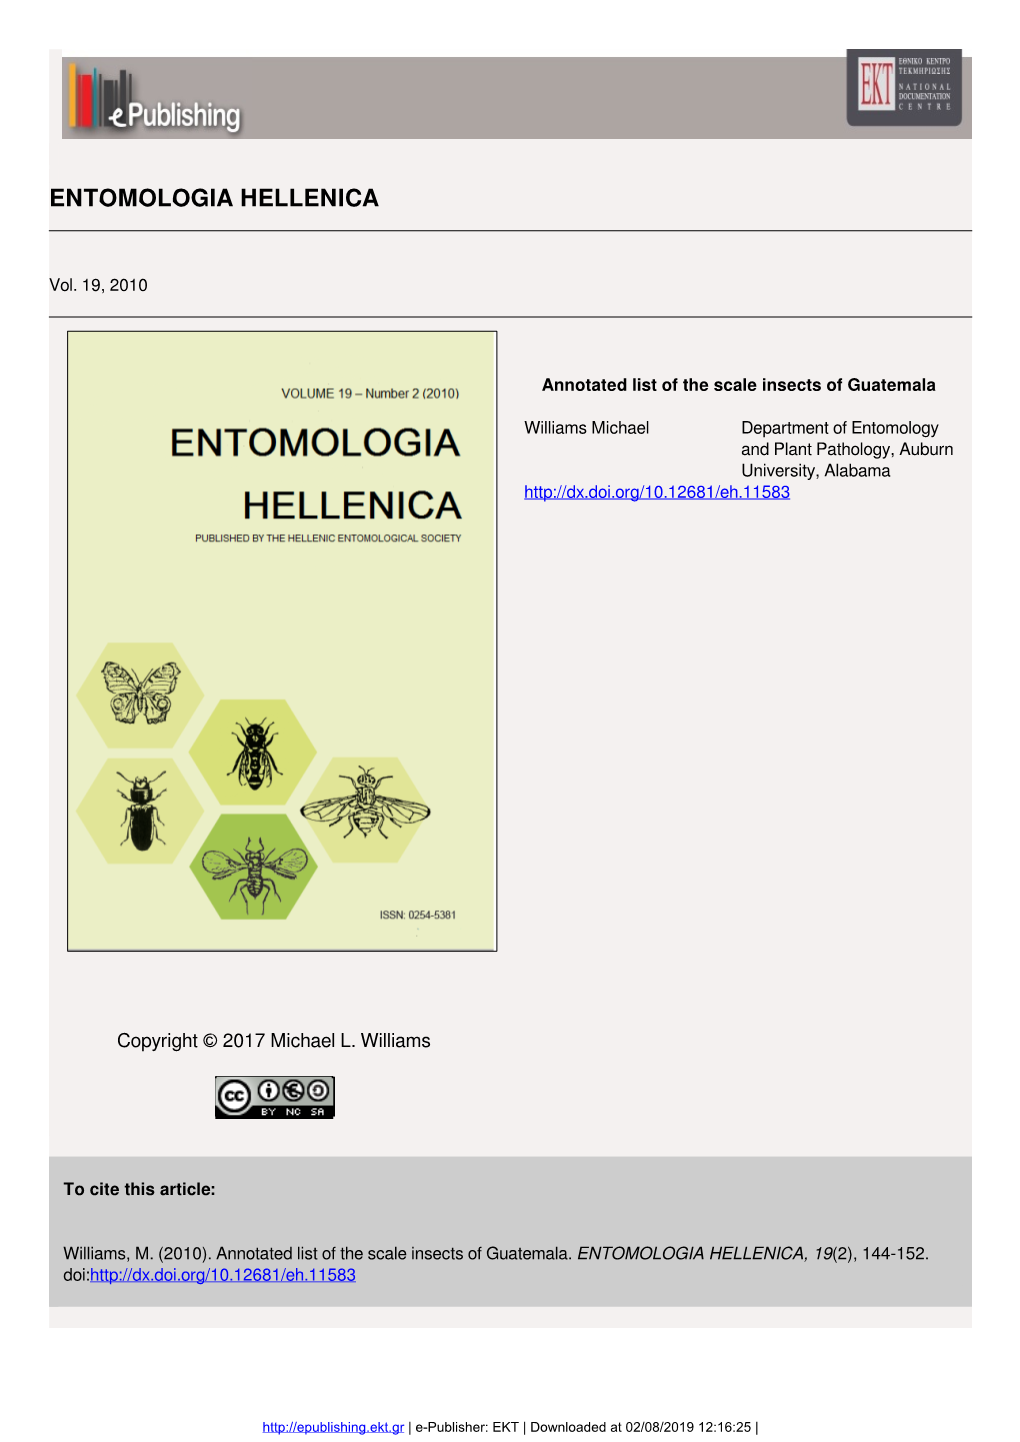 Annotated List of the Scale Insects of Guatemala